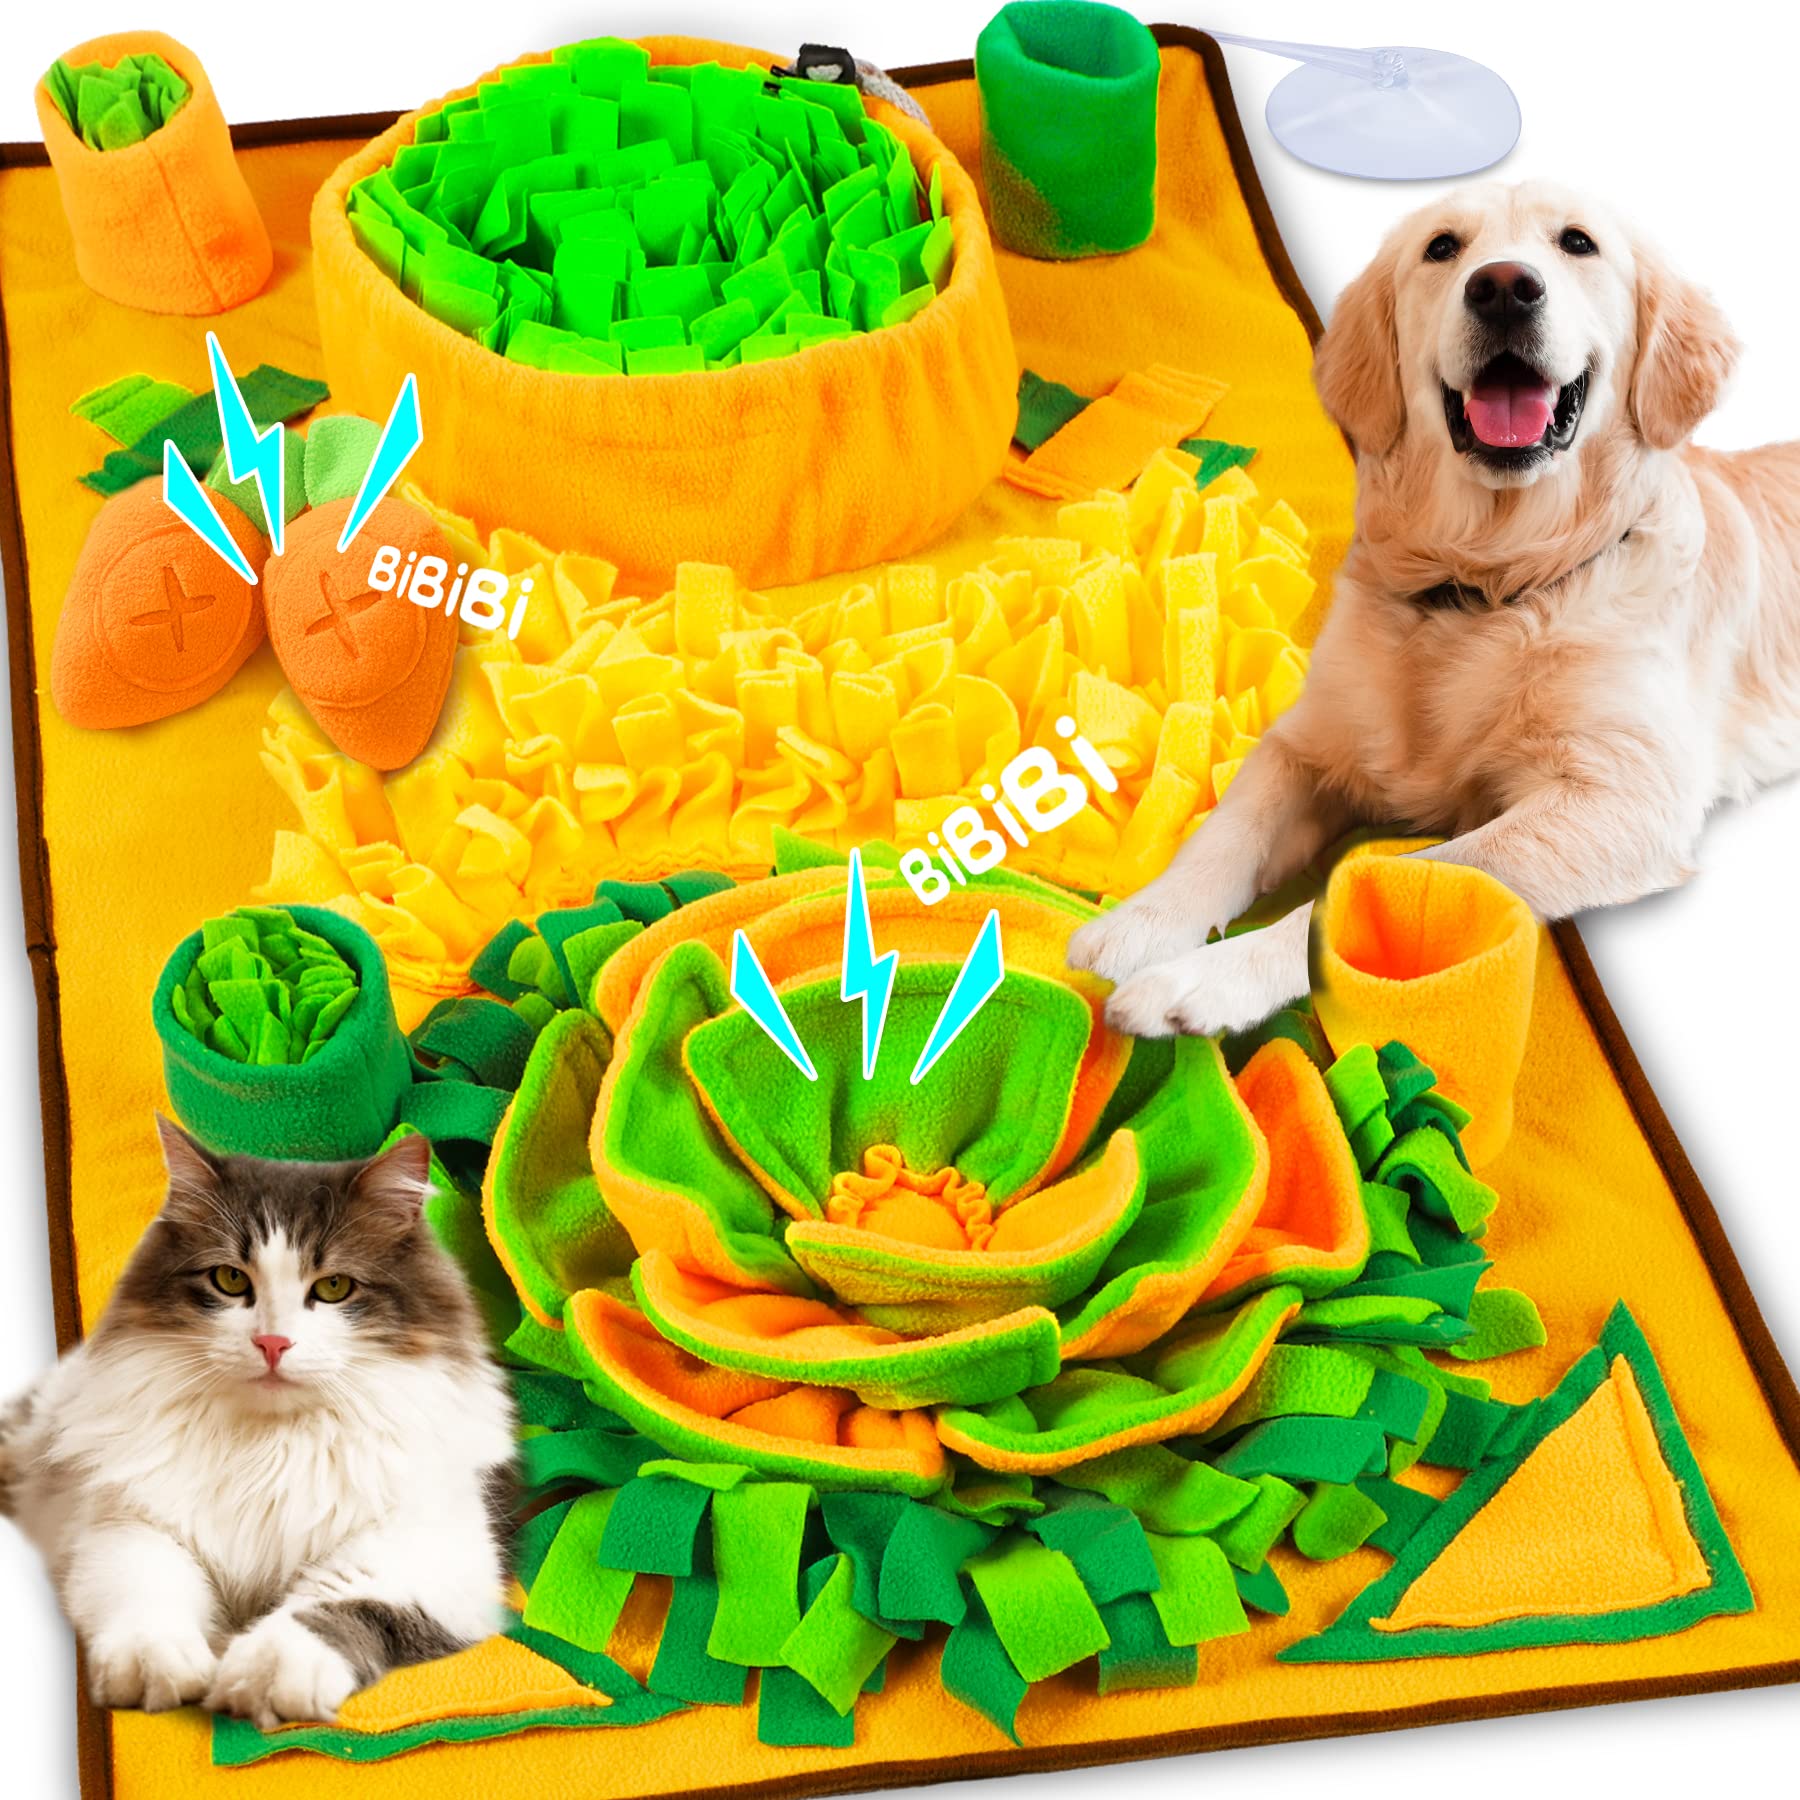 Juqiboom Pet Snuffle Mat for Small/Medium Dogs and Cats, Encourages Natural Foraging Skills for Pets, Interactive Dog Toy - Slow Feeder Puzzle Toy 